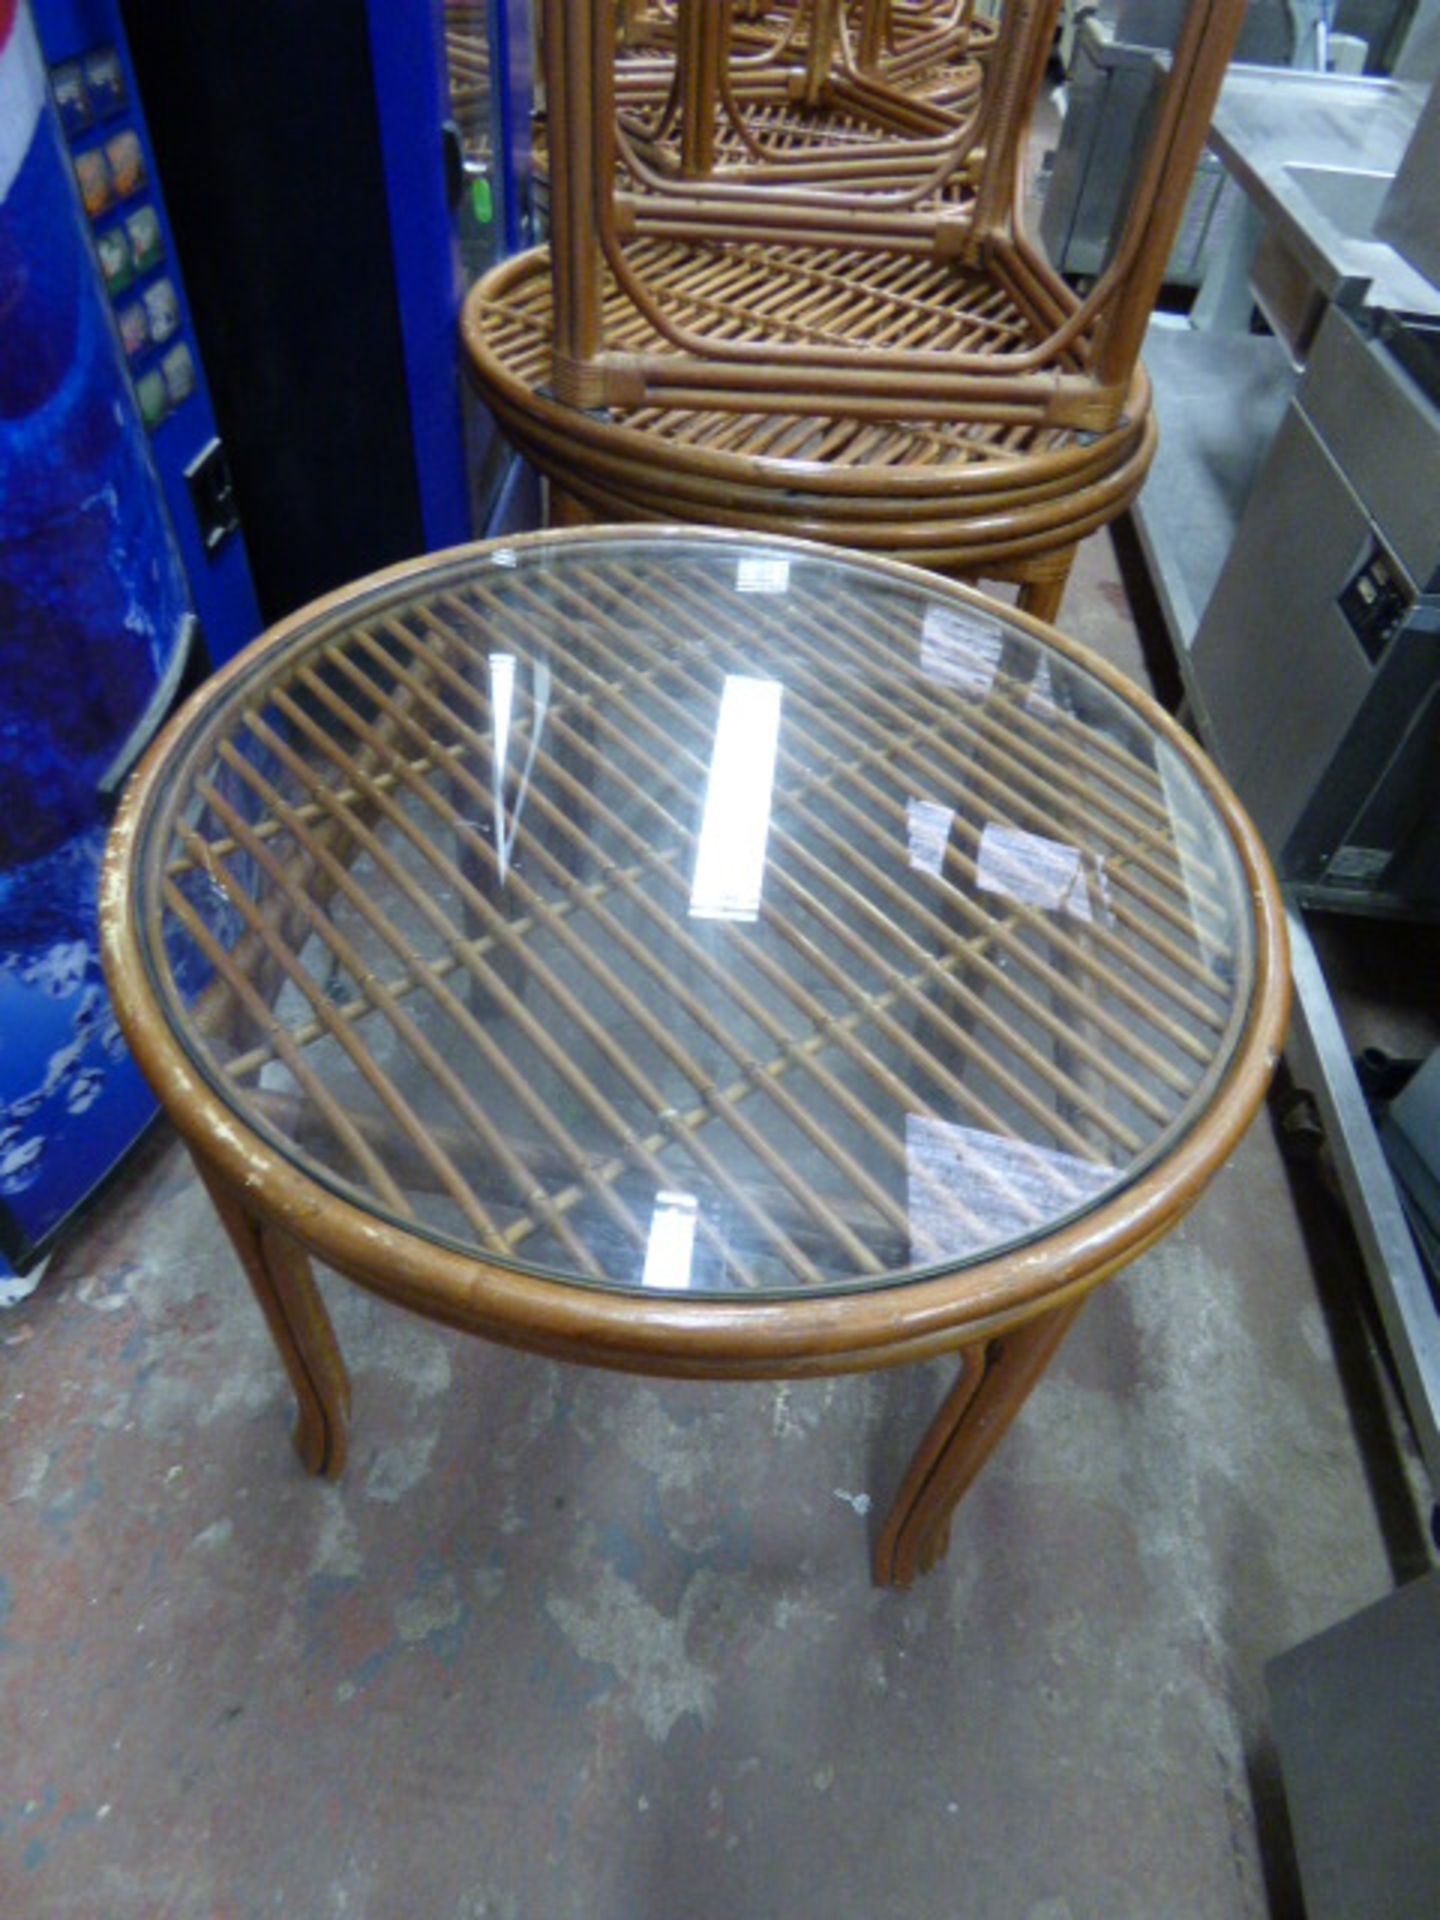 Eleven Bamboo Circular Tables with Glass Tops